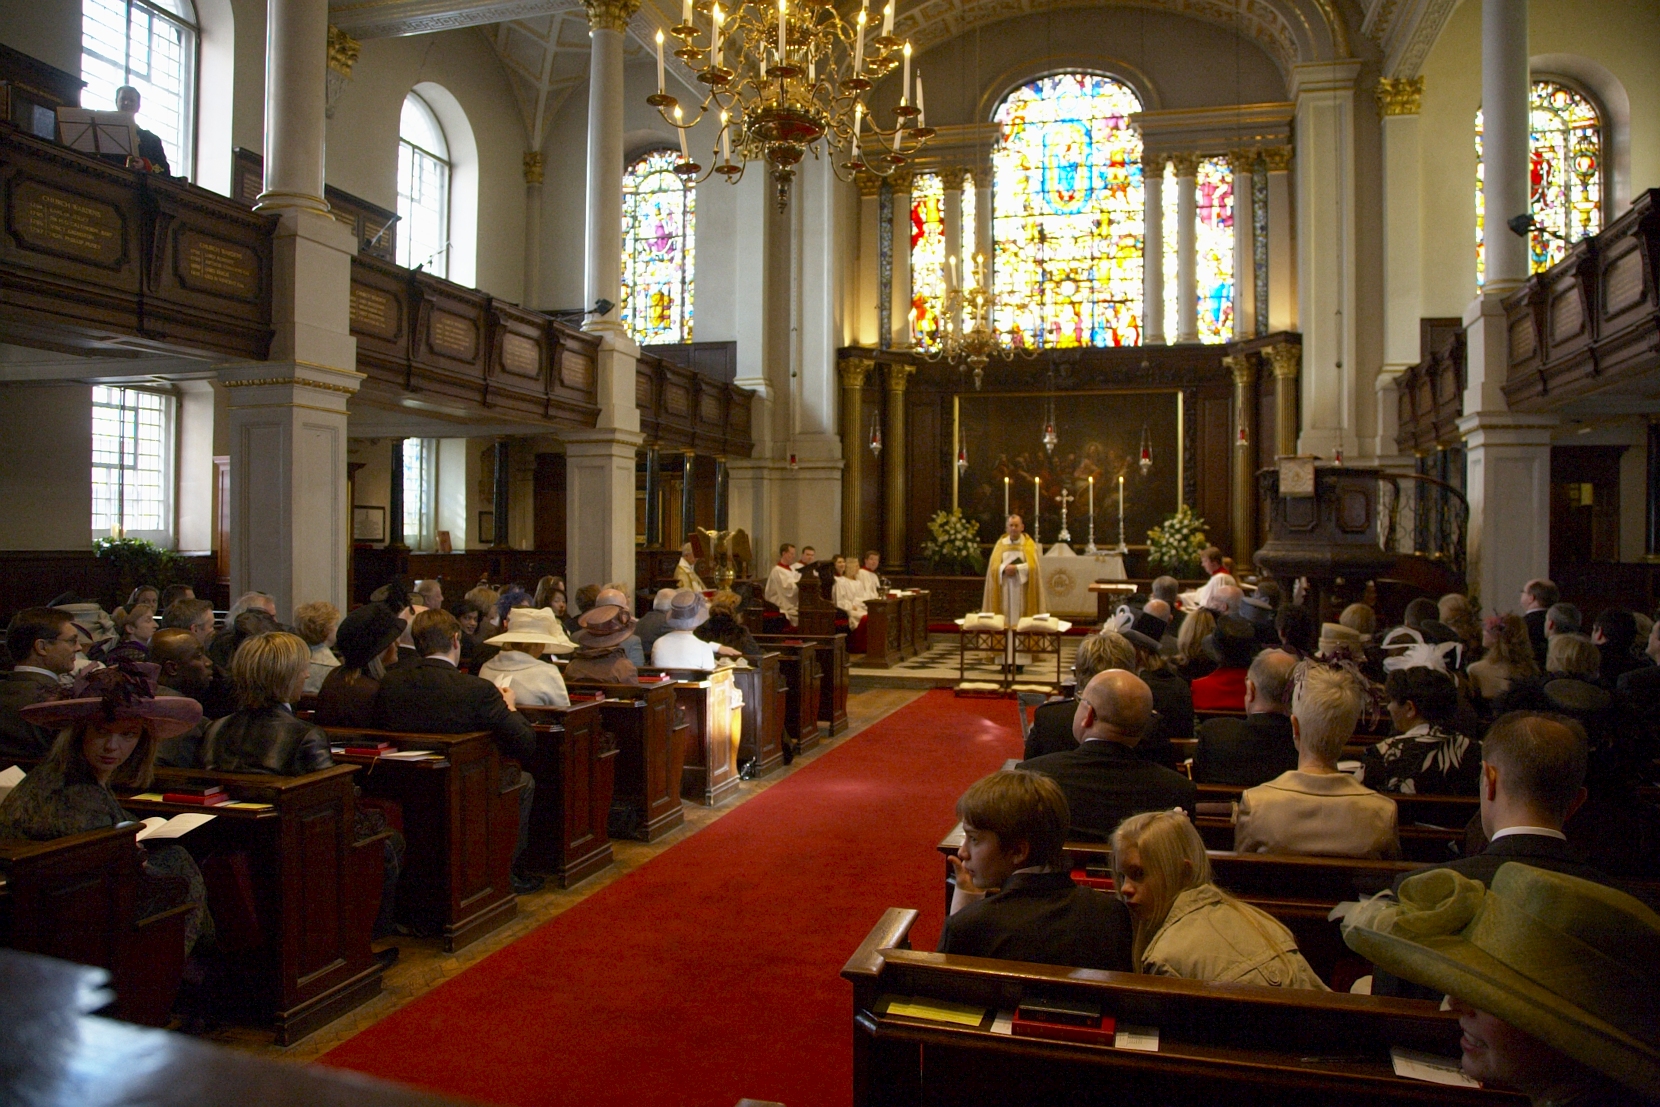 Church wedding image at St George's Hanover Square